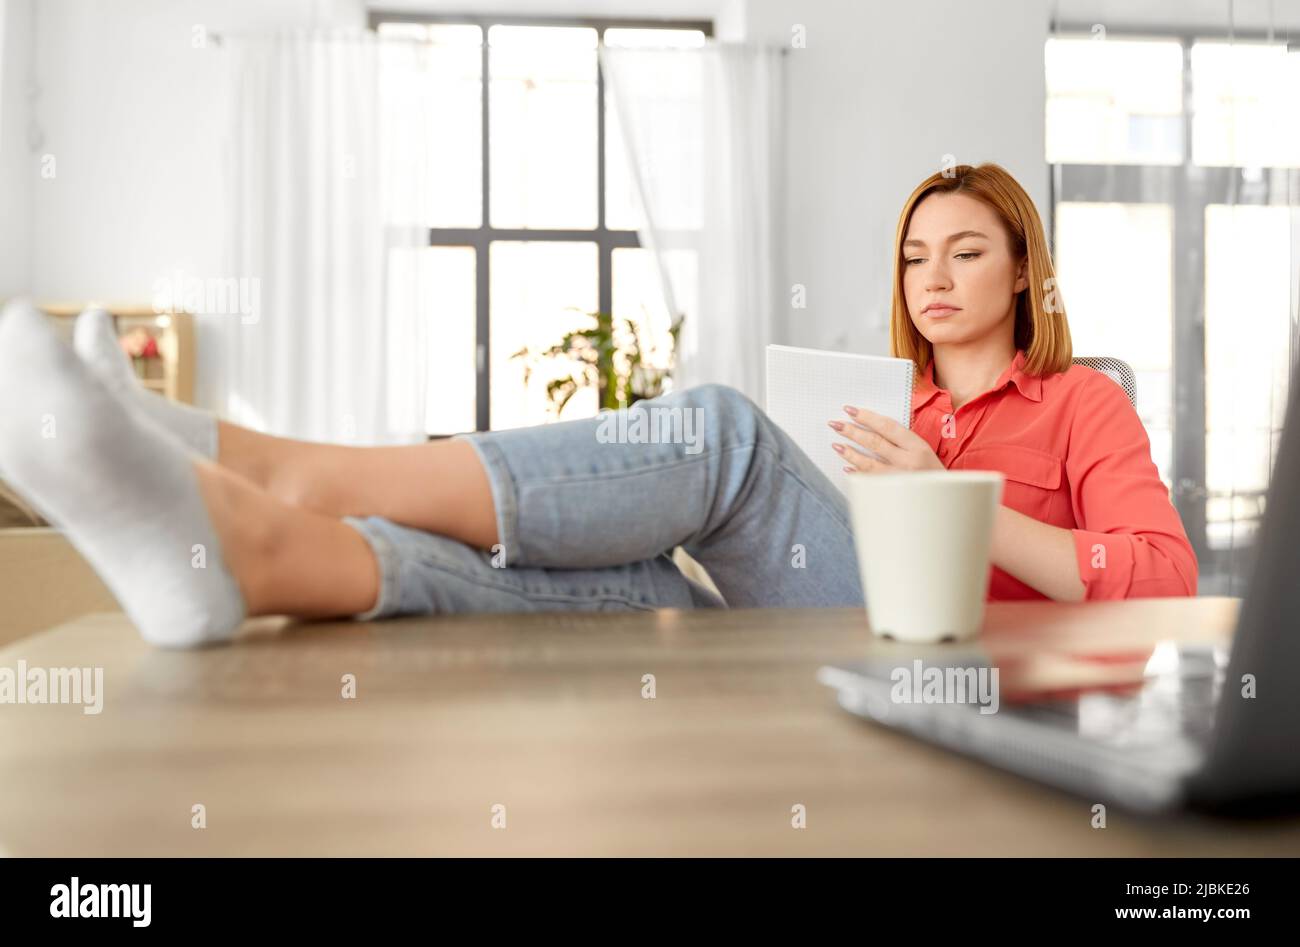 woman with notebook and laptop at home office Stock Photo